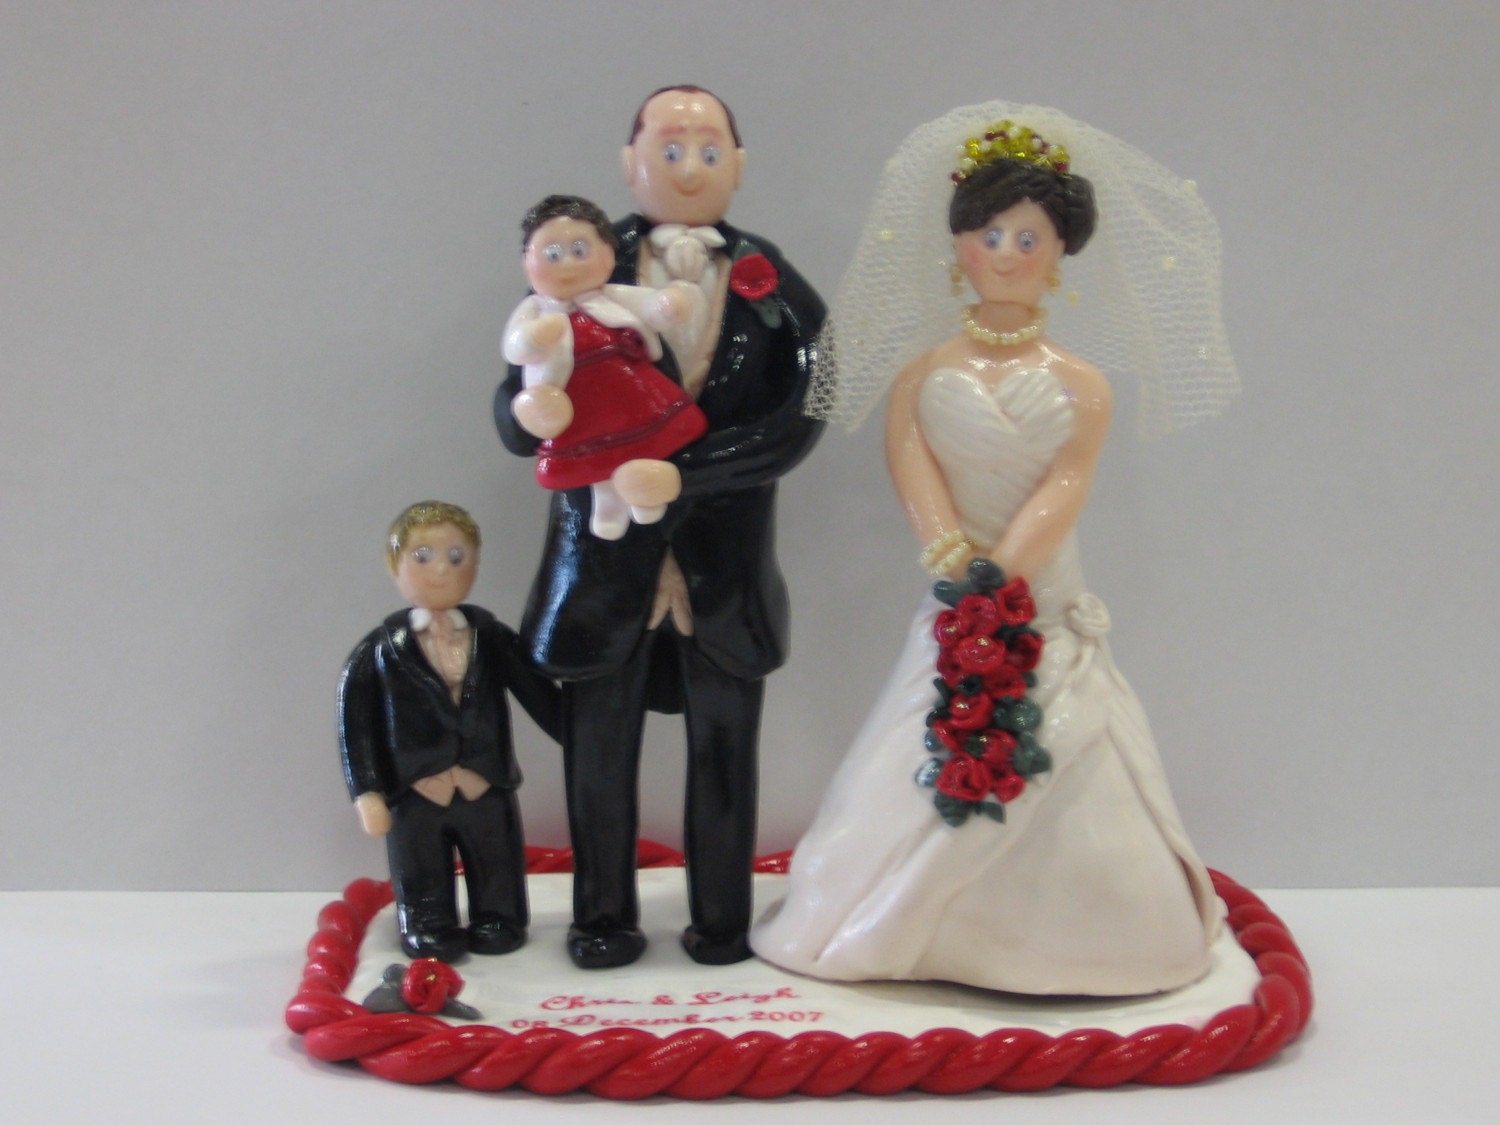 Tags: family wedding cake topper fimo bride groom personalised clay figurine